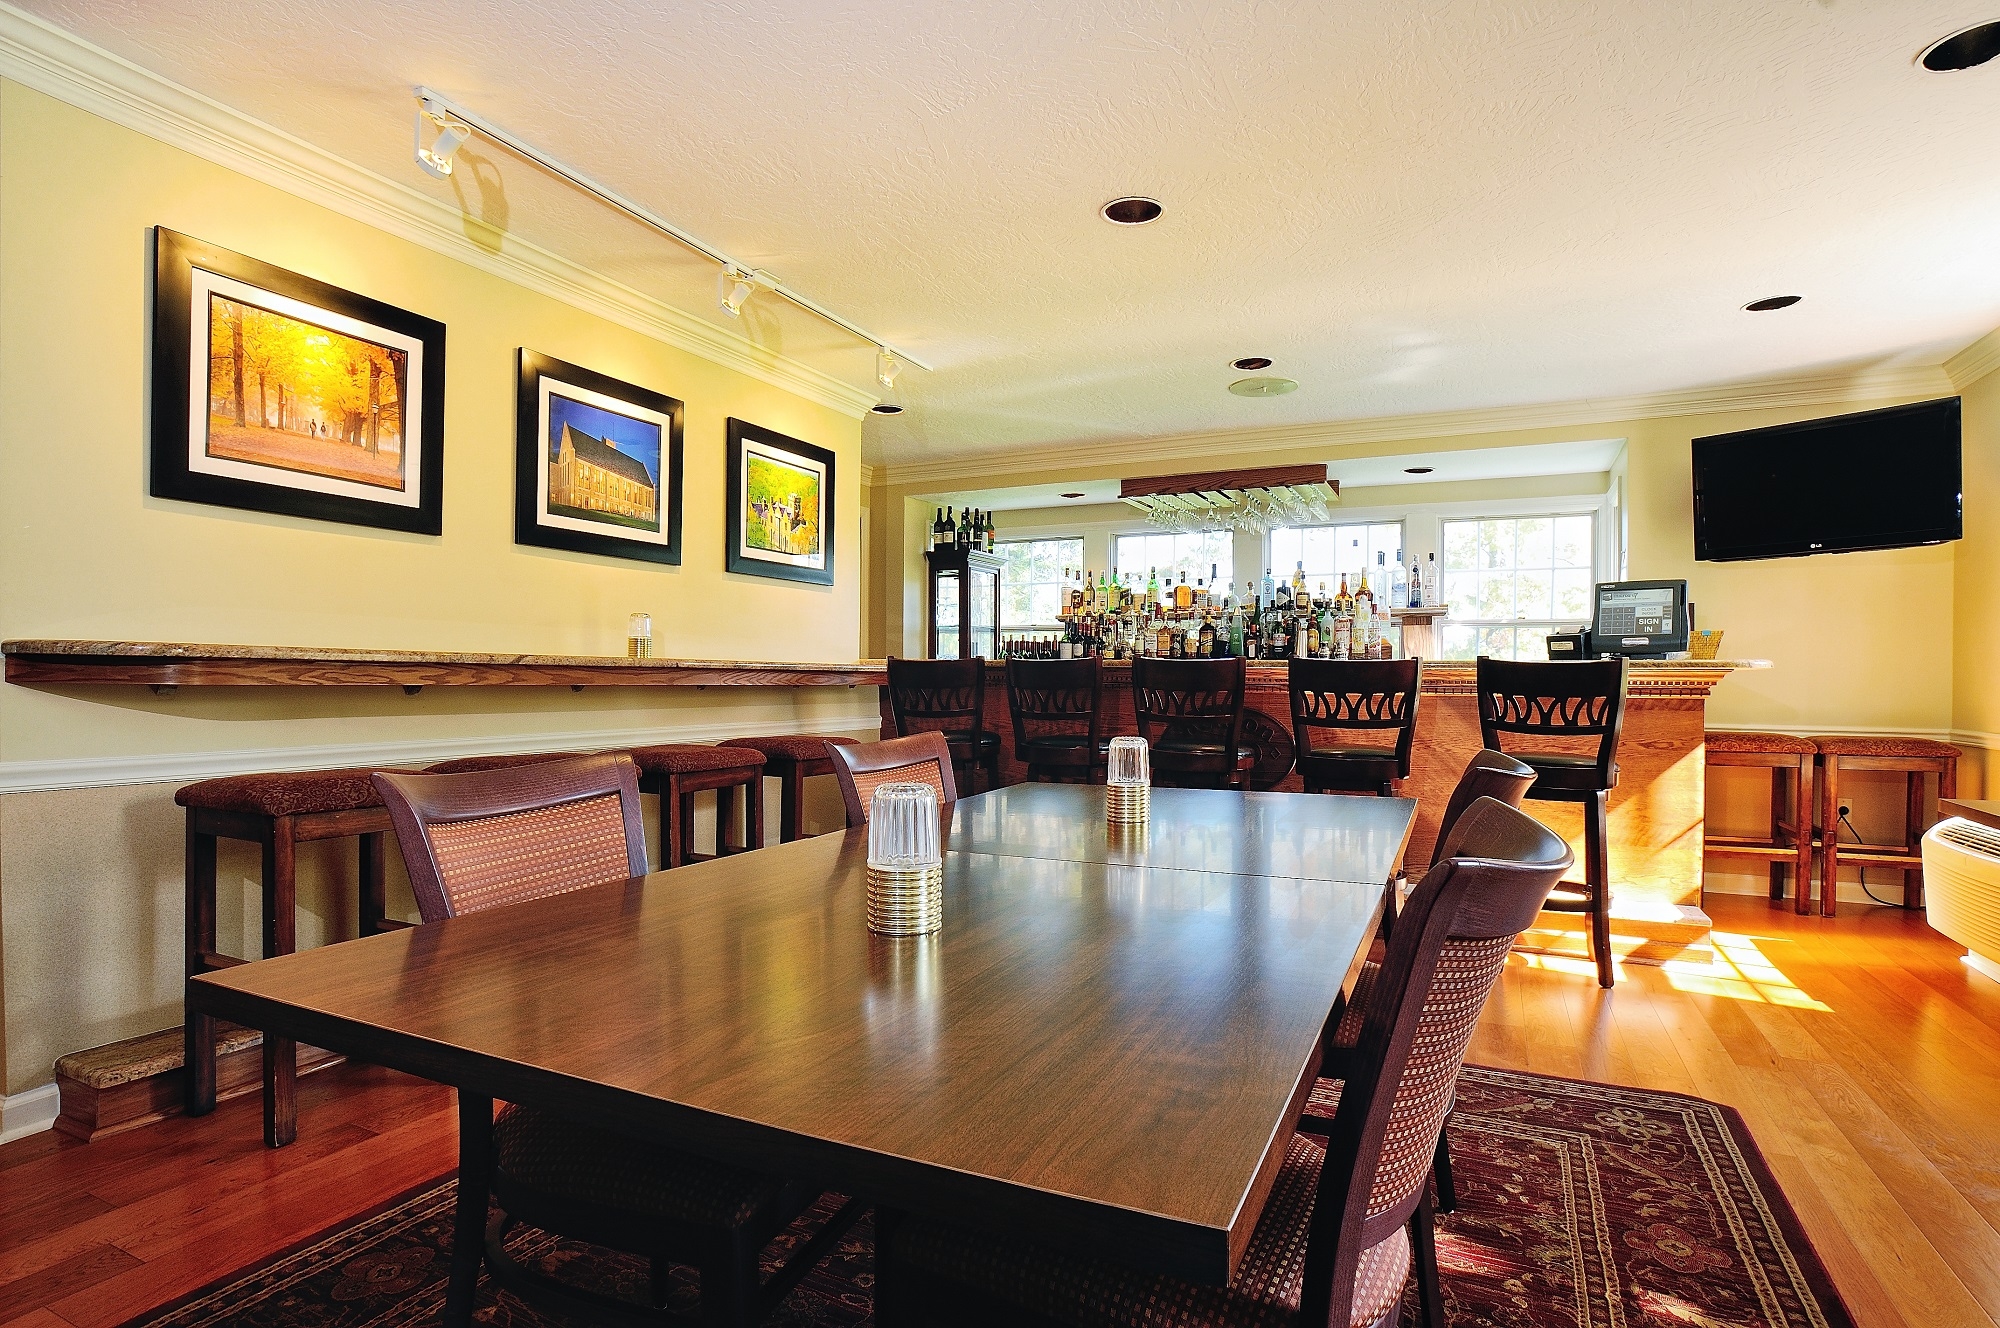 Conference Rooms Kenyon Inn & Restaurant Gambier (740)427-2202